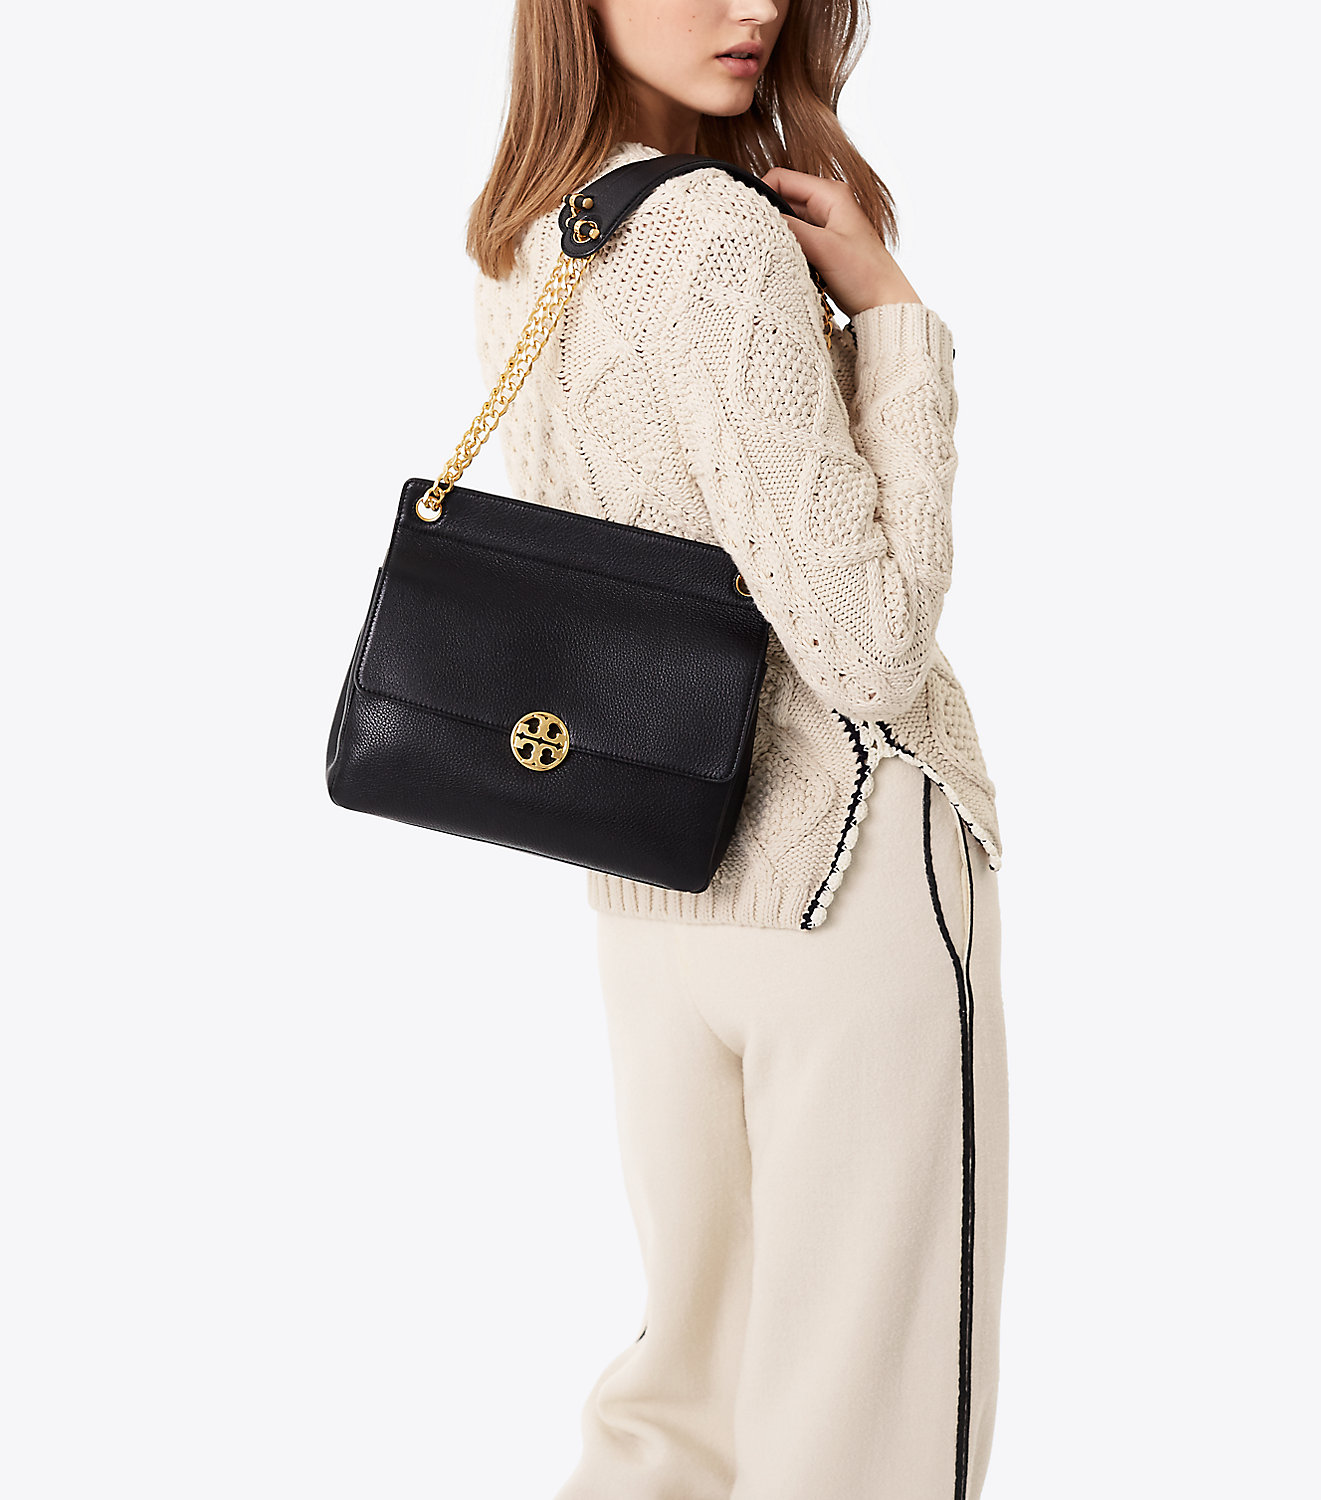 Nordstrom Can Barely Keep This Tory Burch Bag in Stock